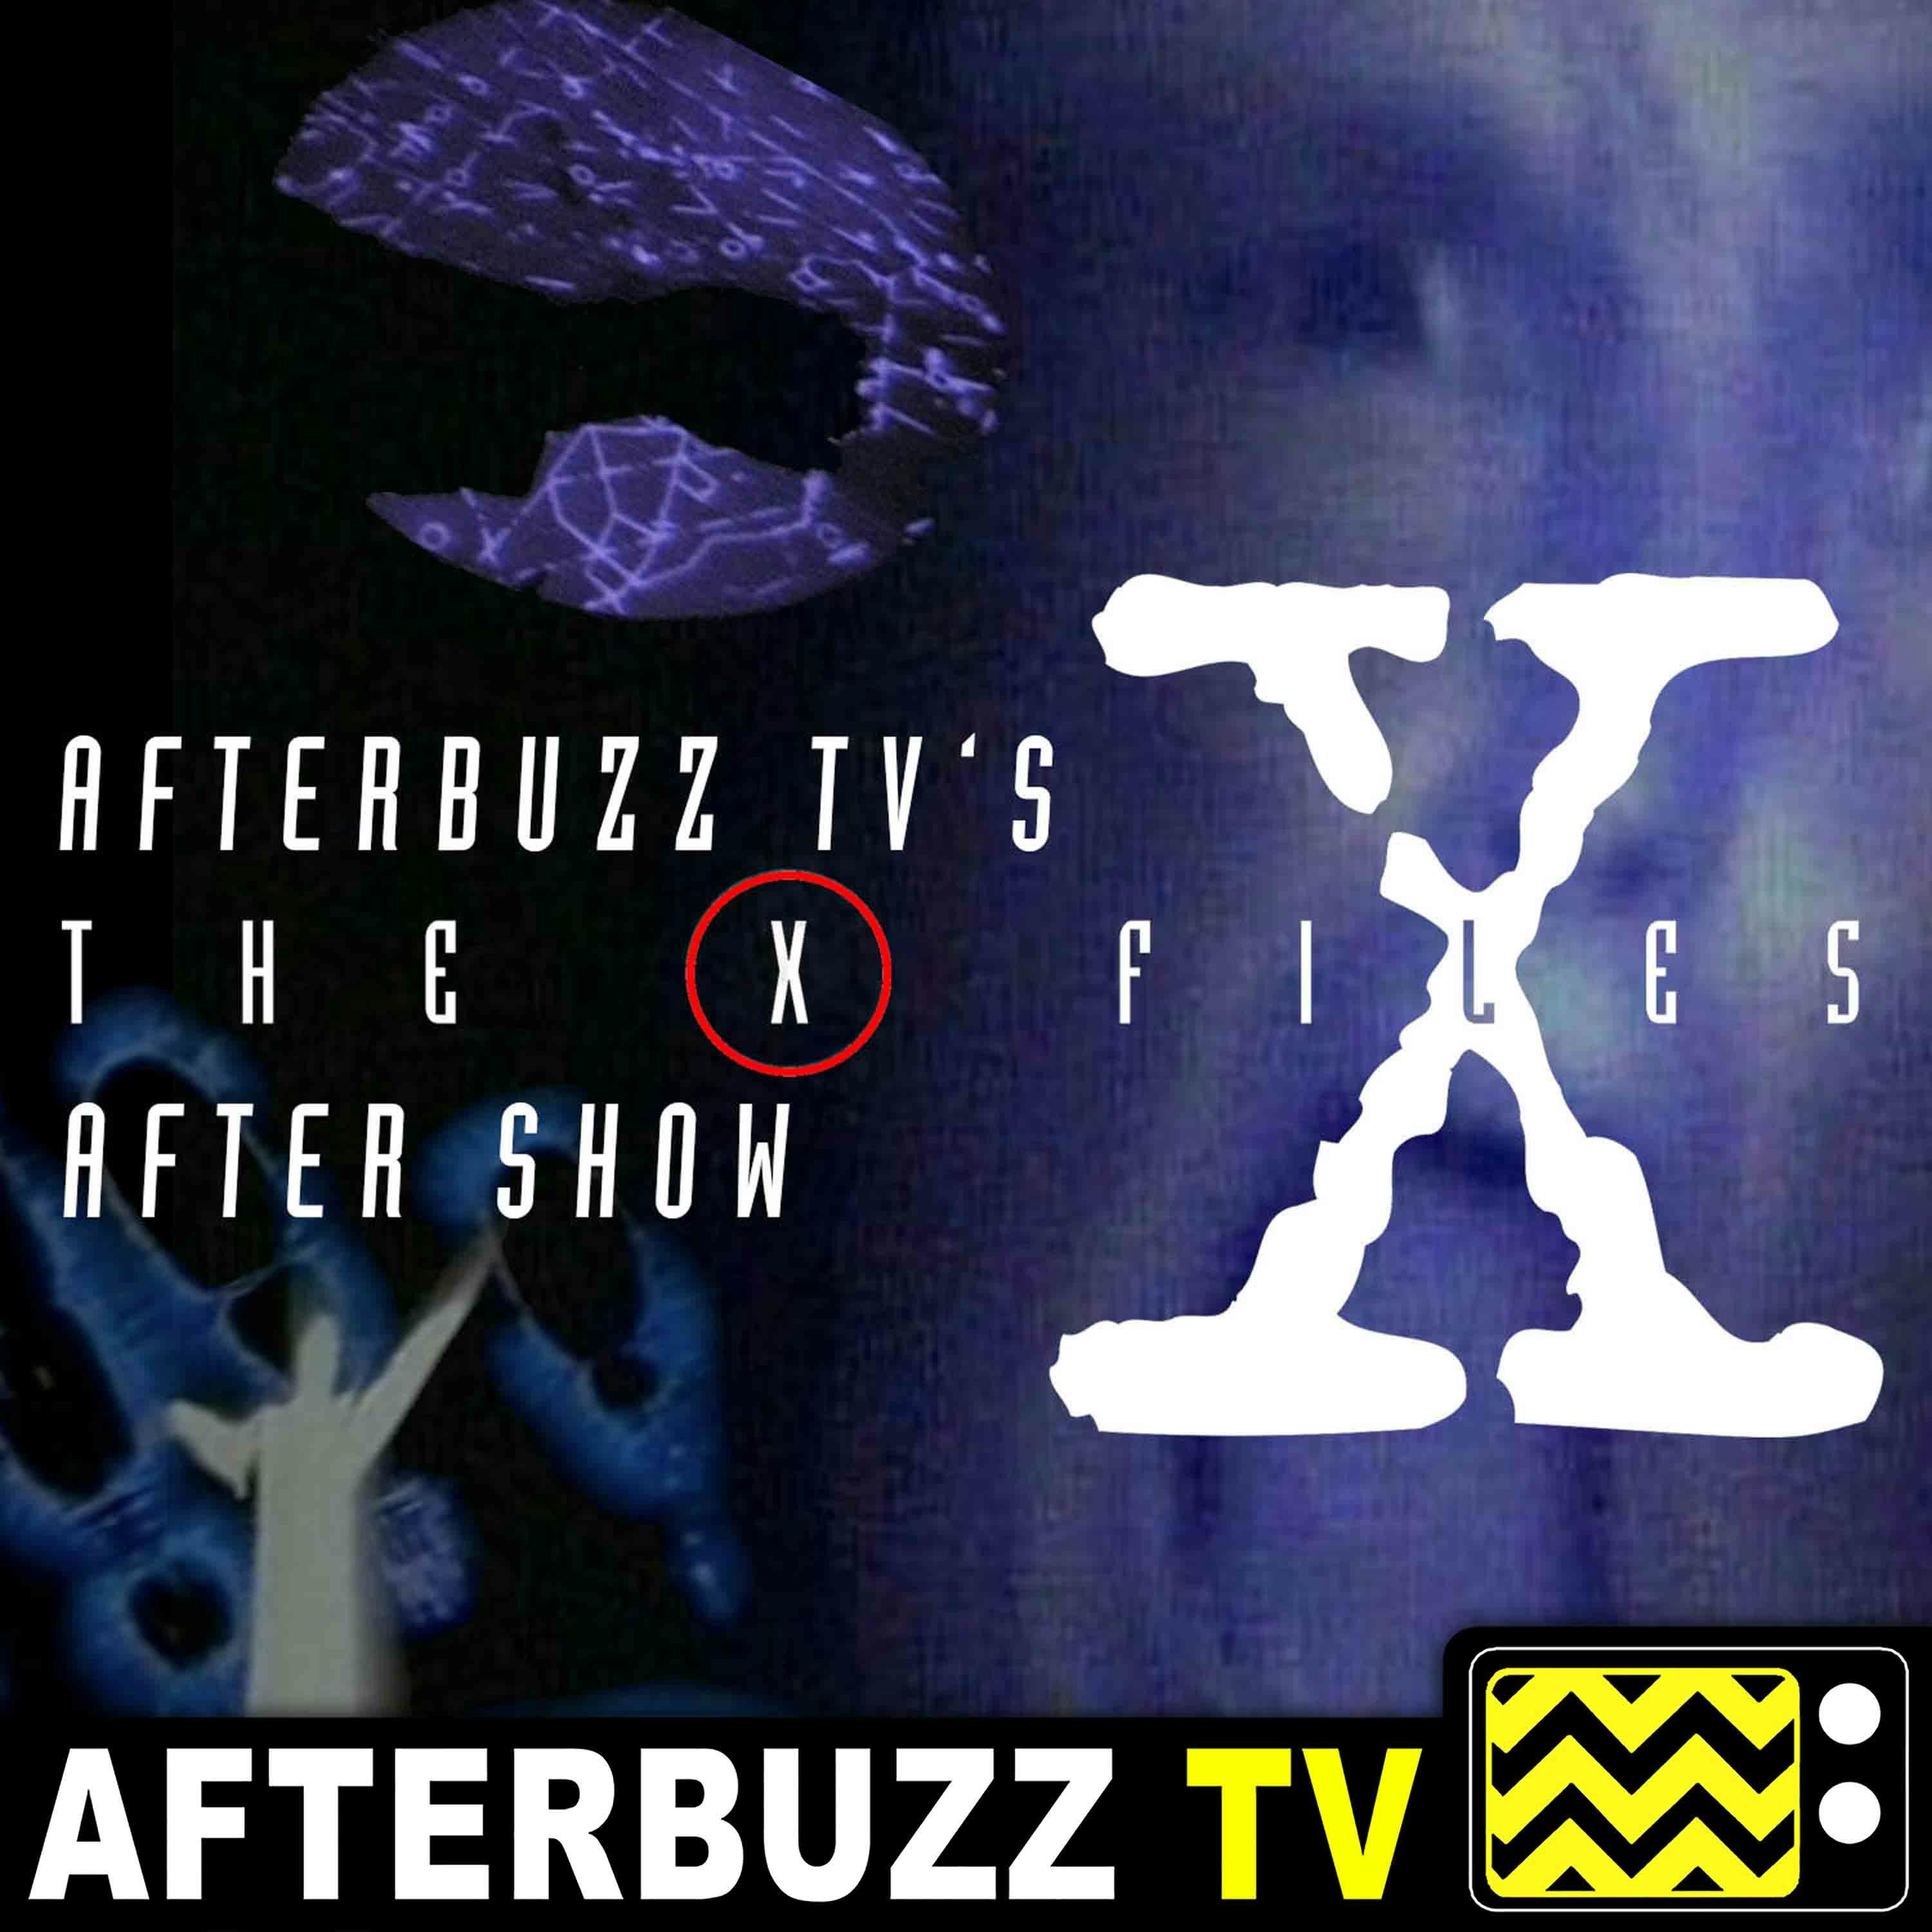 X Files S:11 | My Struggle III E:1 | AfterBuzz TV AfterShow